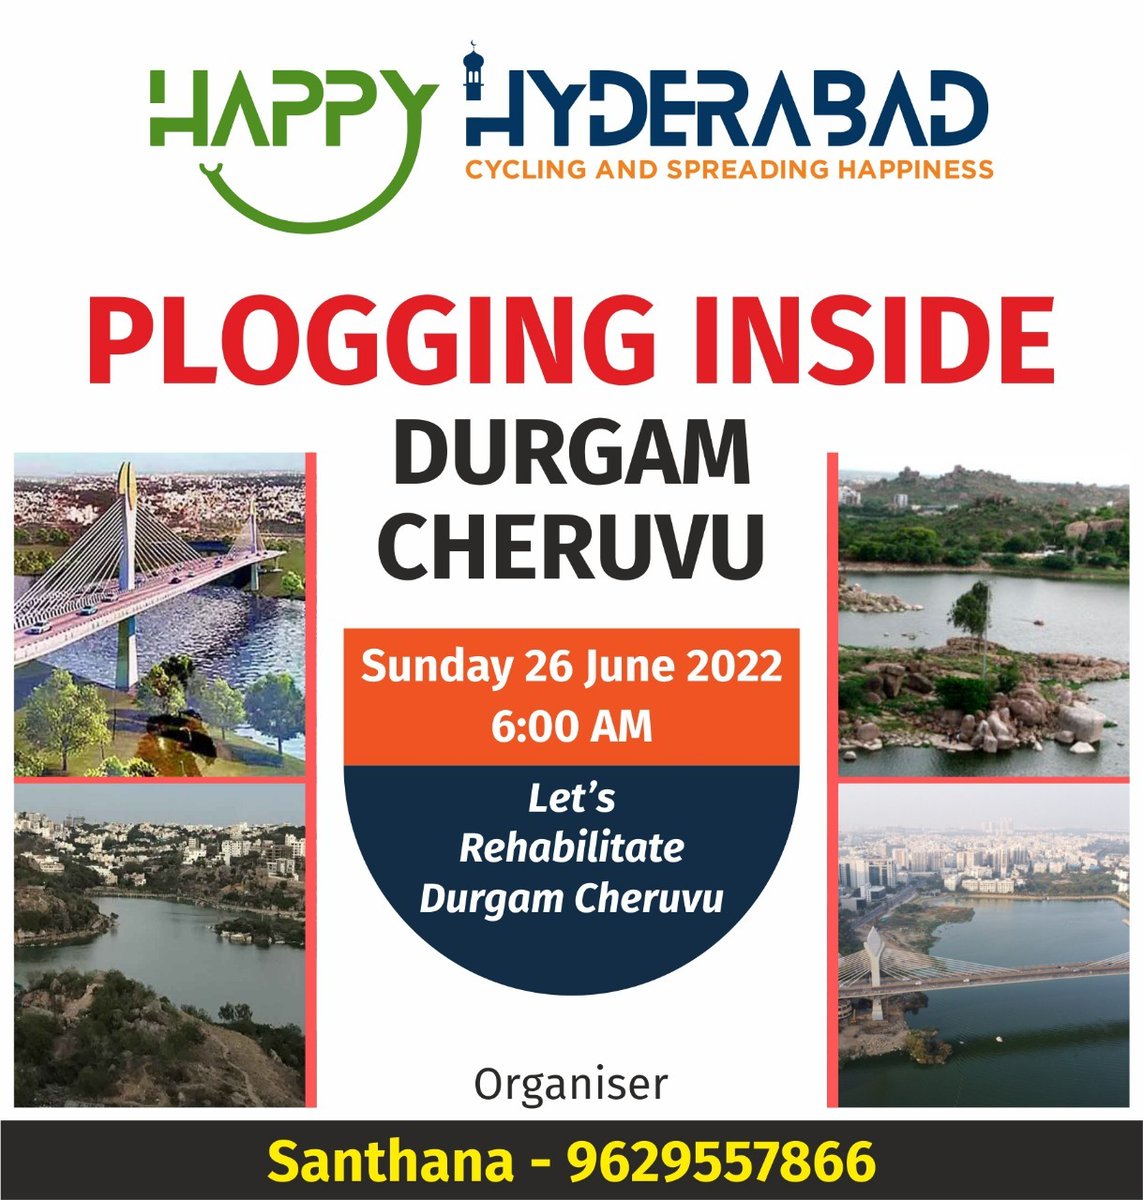 Please join us on 26 June 2022 , 6 am at Durgam Cherevu 

Initiative by #HappyHyderabad 
Initiated by @sselvan #BicyclemayorofHyderabad 

We can walk / Run & do #plogging Cleanup at #durgamcheruvu track

Please everyone join 🏃‍♀️🚵‍♂️

#CyclistHyderabad #communityservicebybicycle